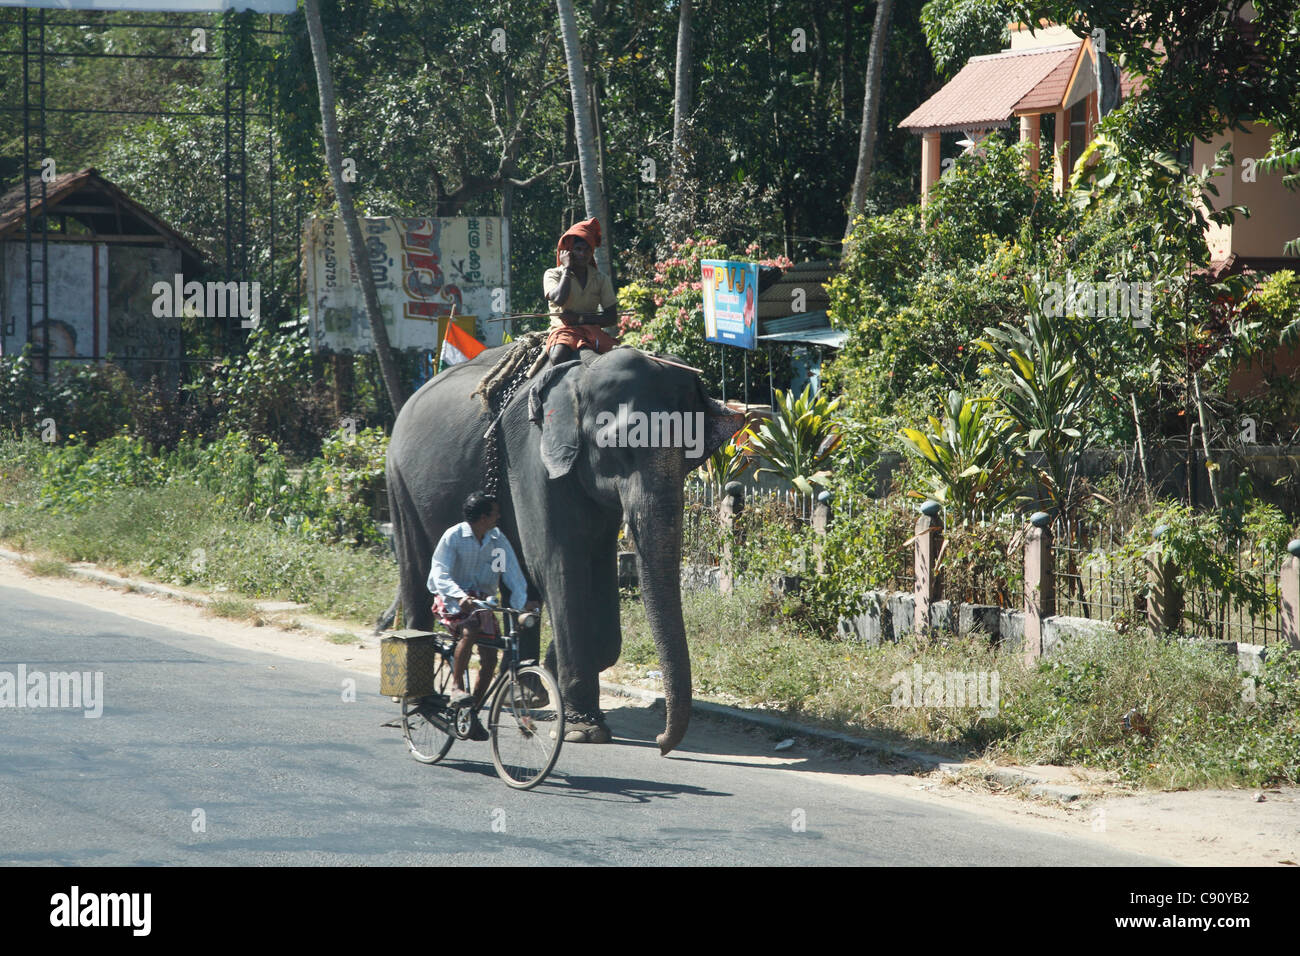 Elephants are valuable strong working animals in the state of Kerala, India. Stock Photo